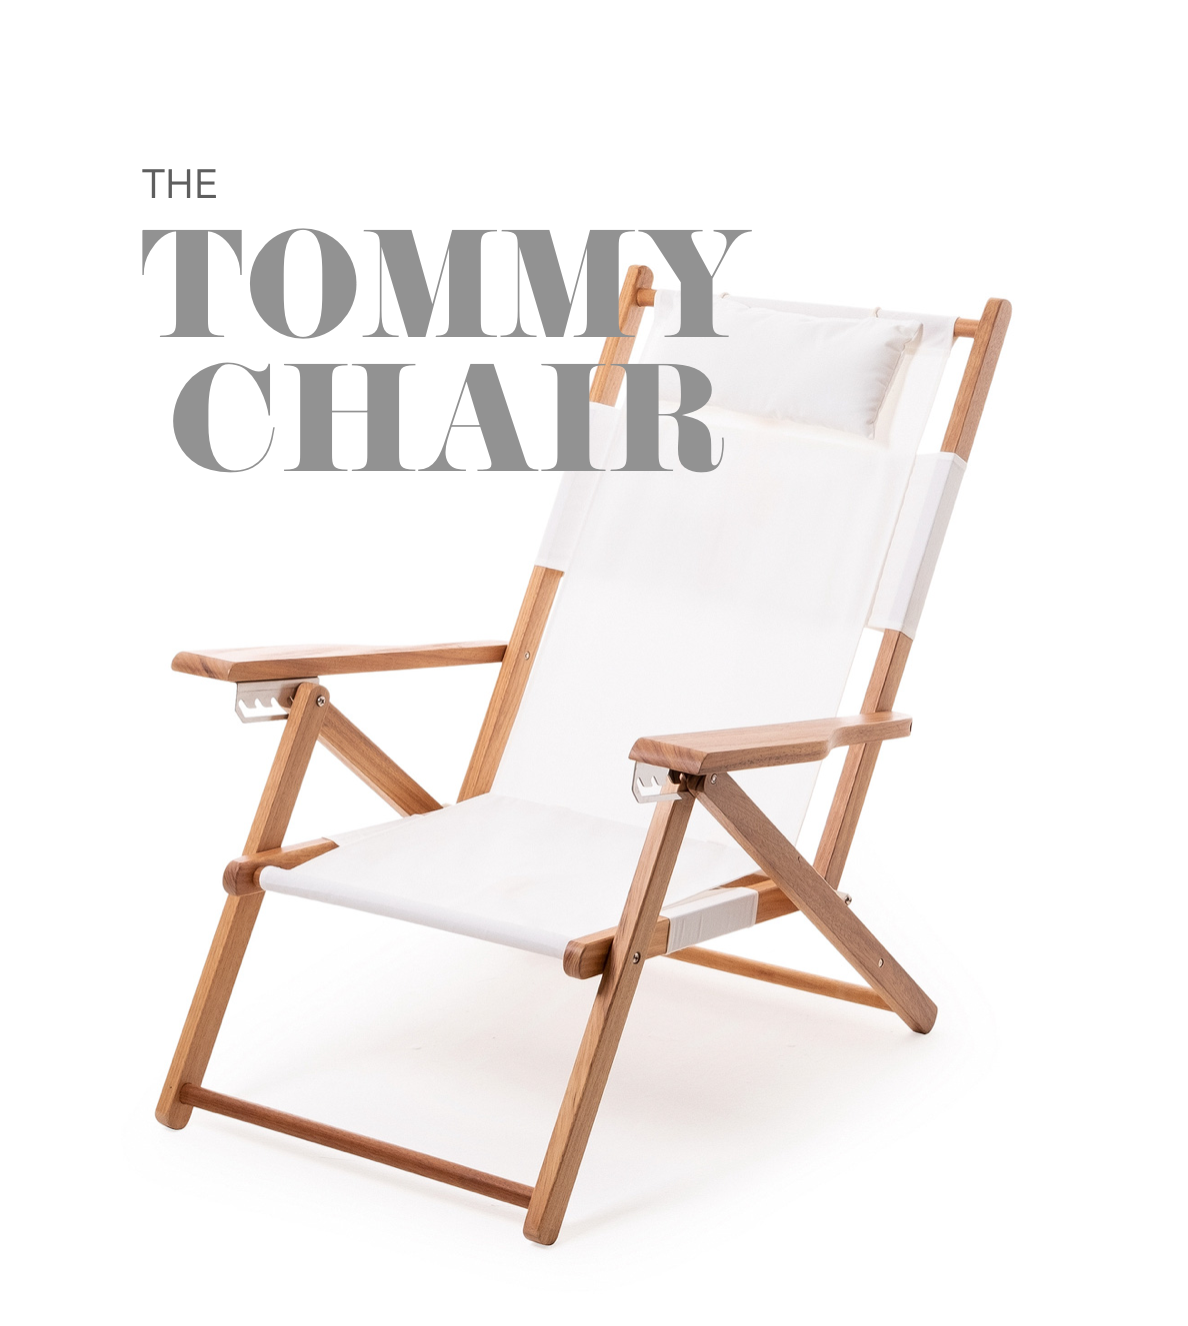 Video of the tommy chair